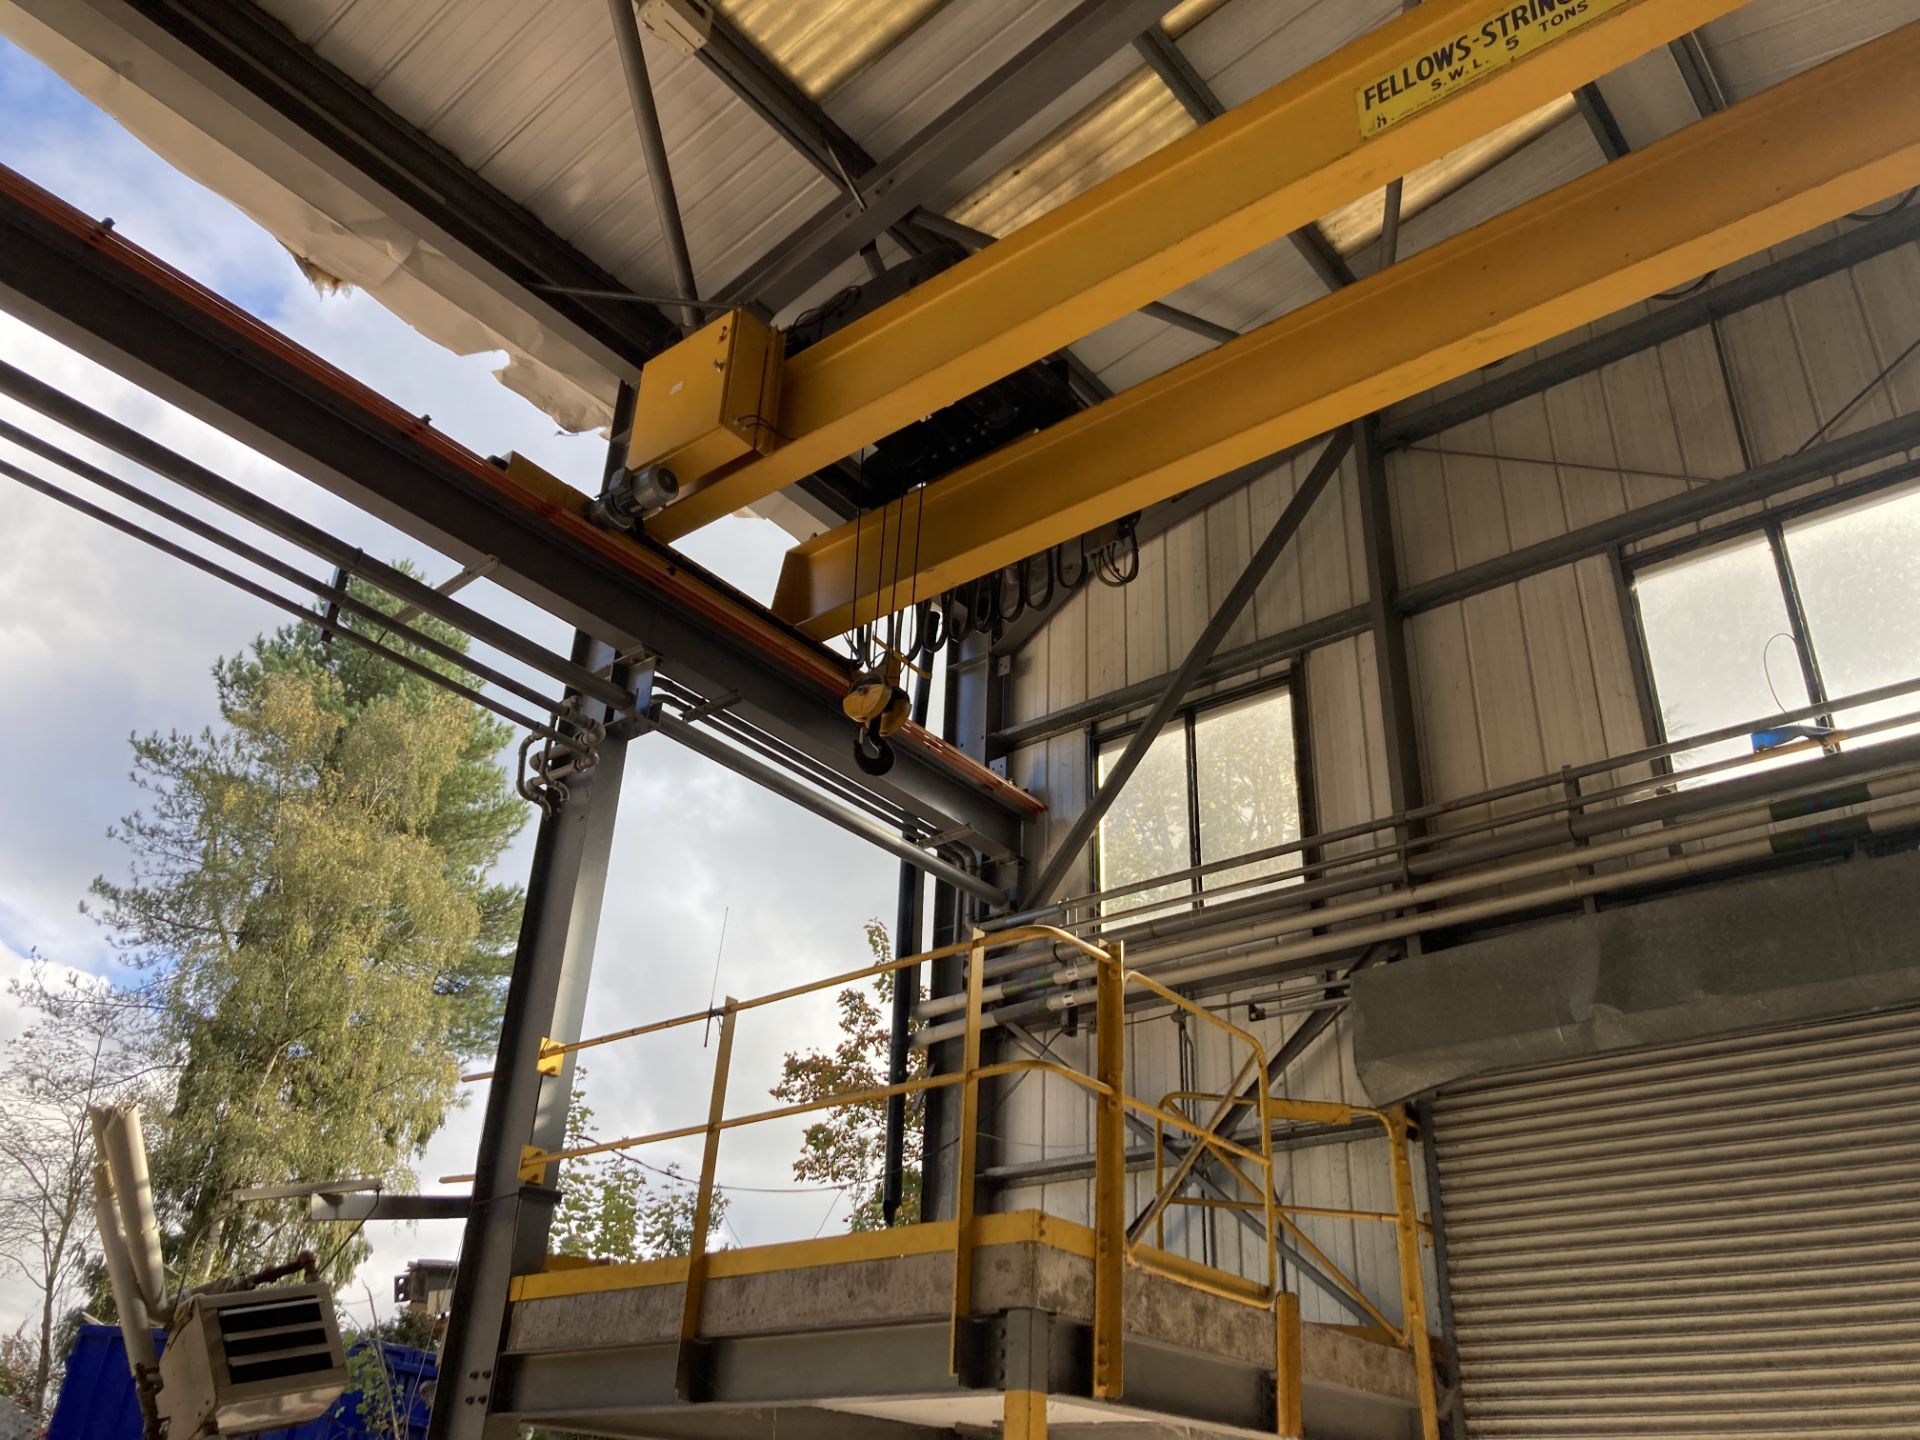 Fellows-Stringer 5 TON TWIN GIRDER OVERHEAD TRAVELLING CRANE, approx. width of crane – 10.73m x - Image 10 of 11